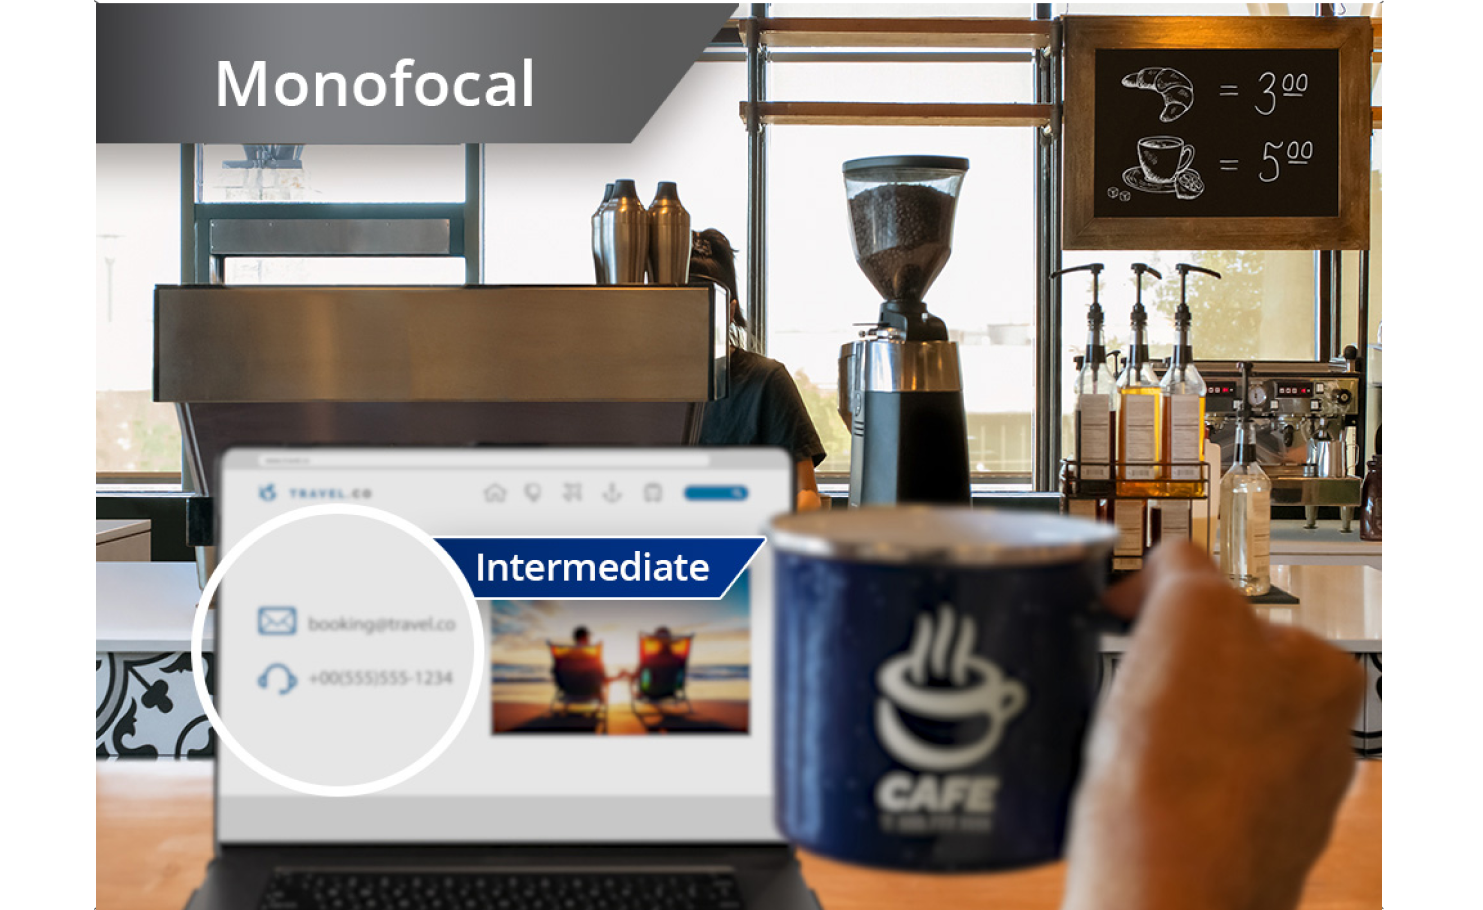 Slightly blurred image of a coffee shop with a view from the counter of coffee machines and other ingredients. A laptop is open on the countertop and an individual’s hand holds up a coffee mug to the right of the laptop screen. White text at the top left corner of this image reads “Monofocal.”